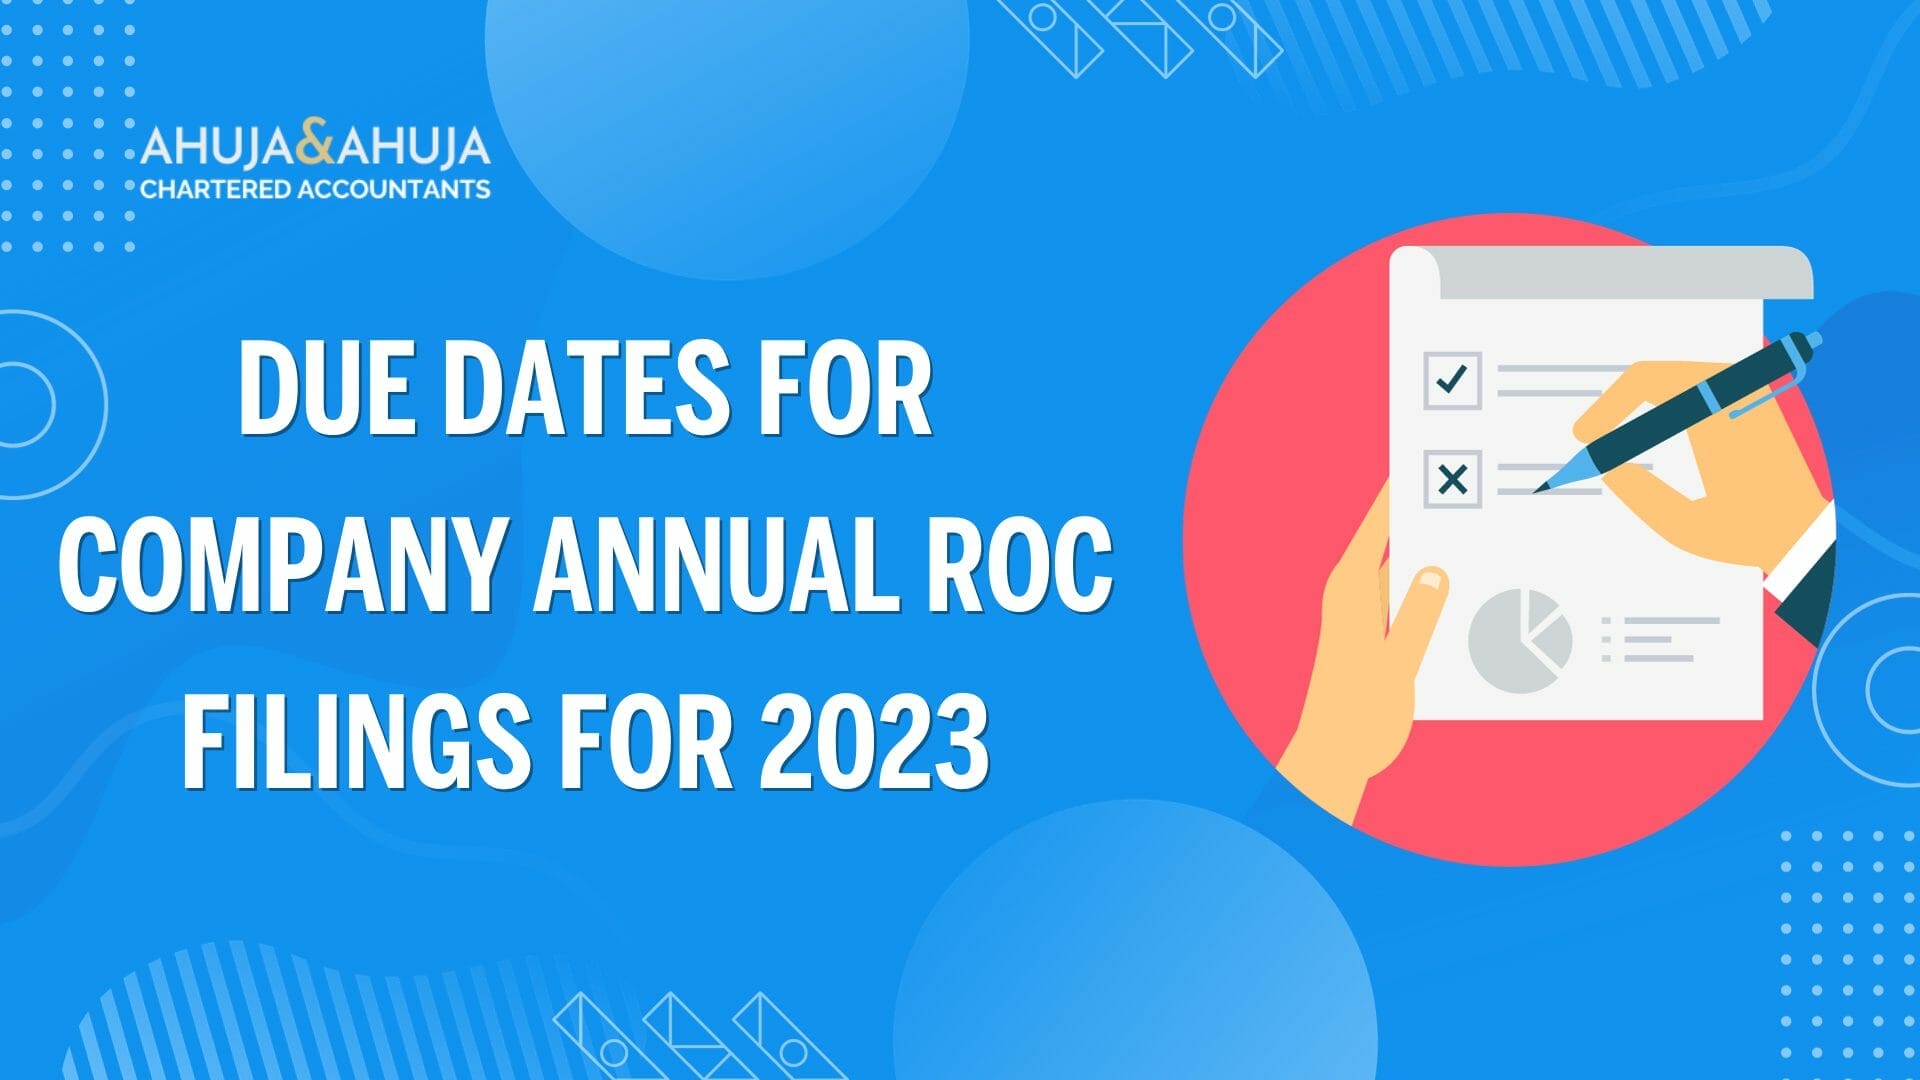 Due Dates for Company Annual ROC Filings for 2023